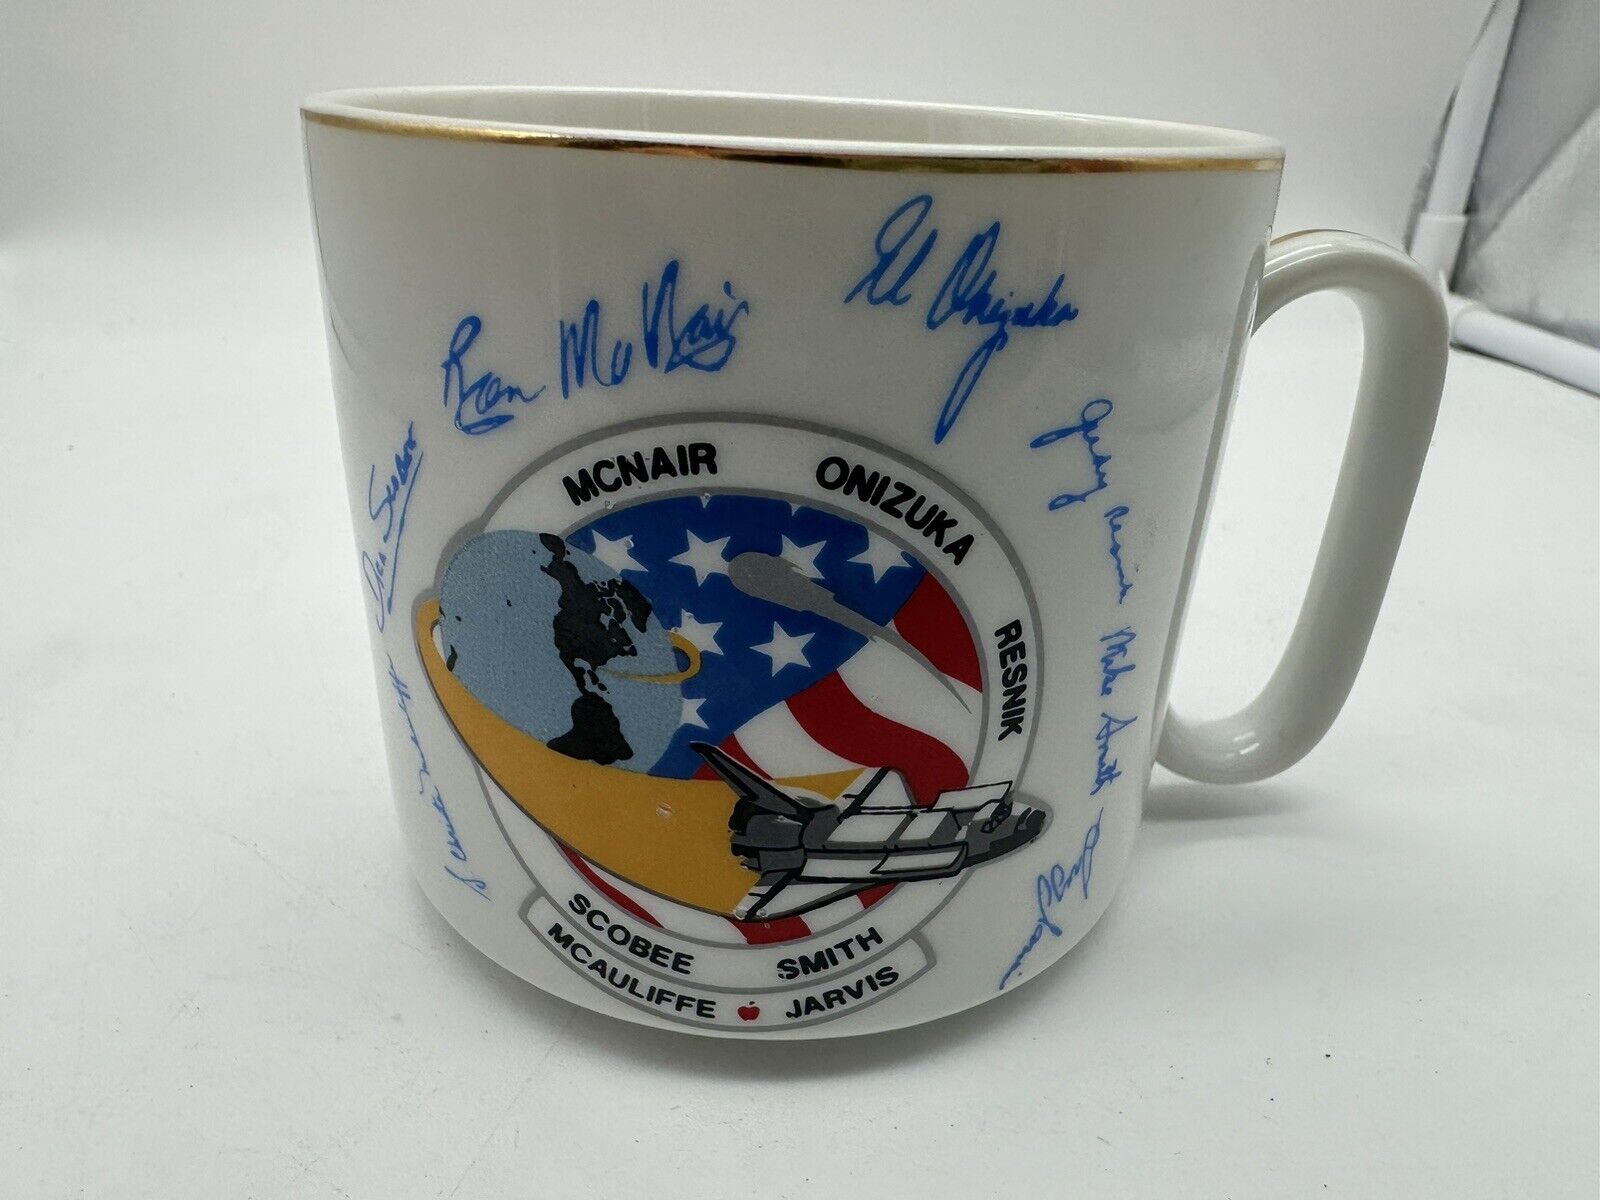 Vintage Rare Challenger Space Shuttle Mug 1986 With Signatures Date And Mission